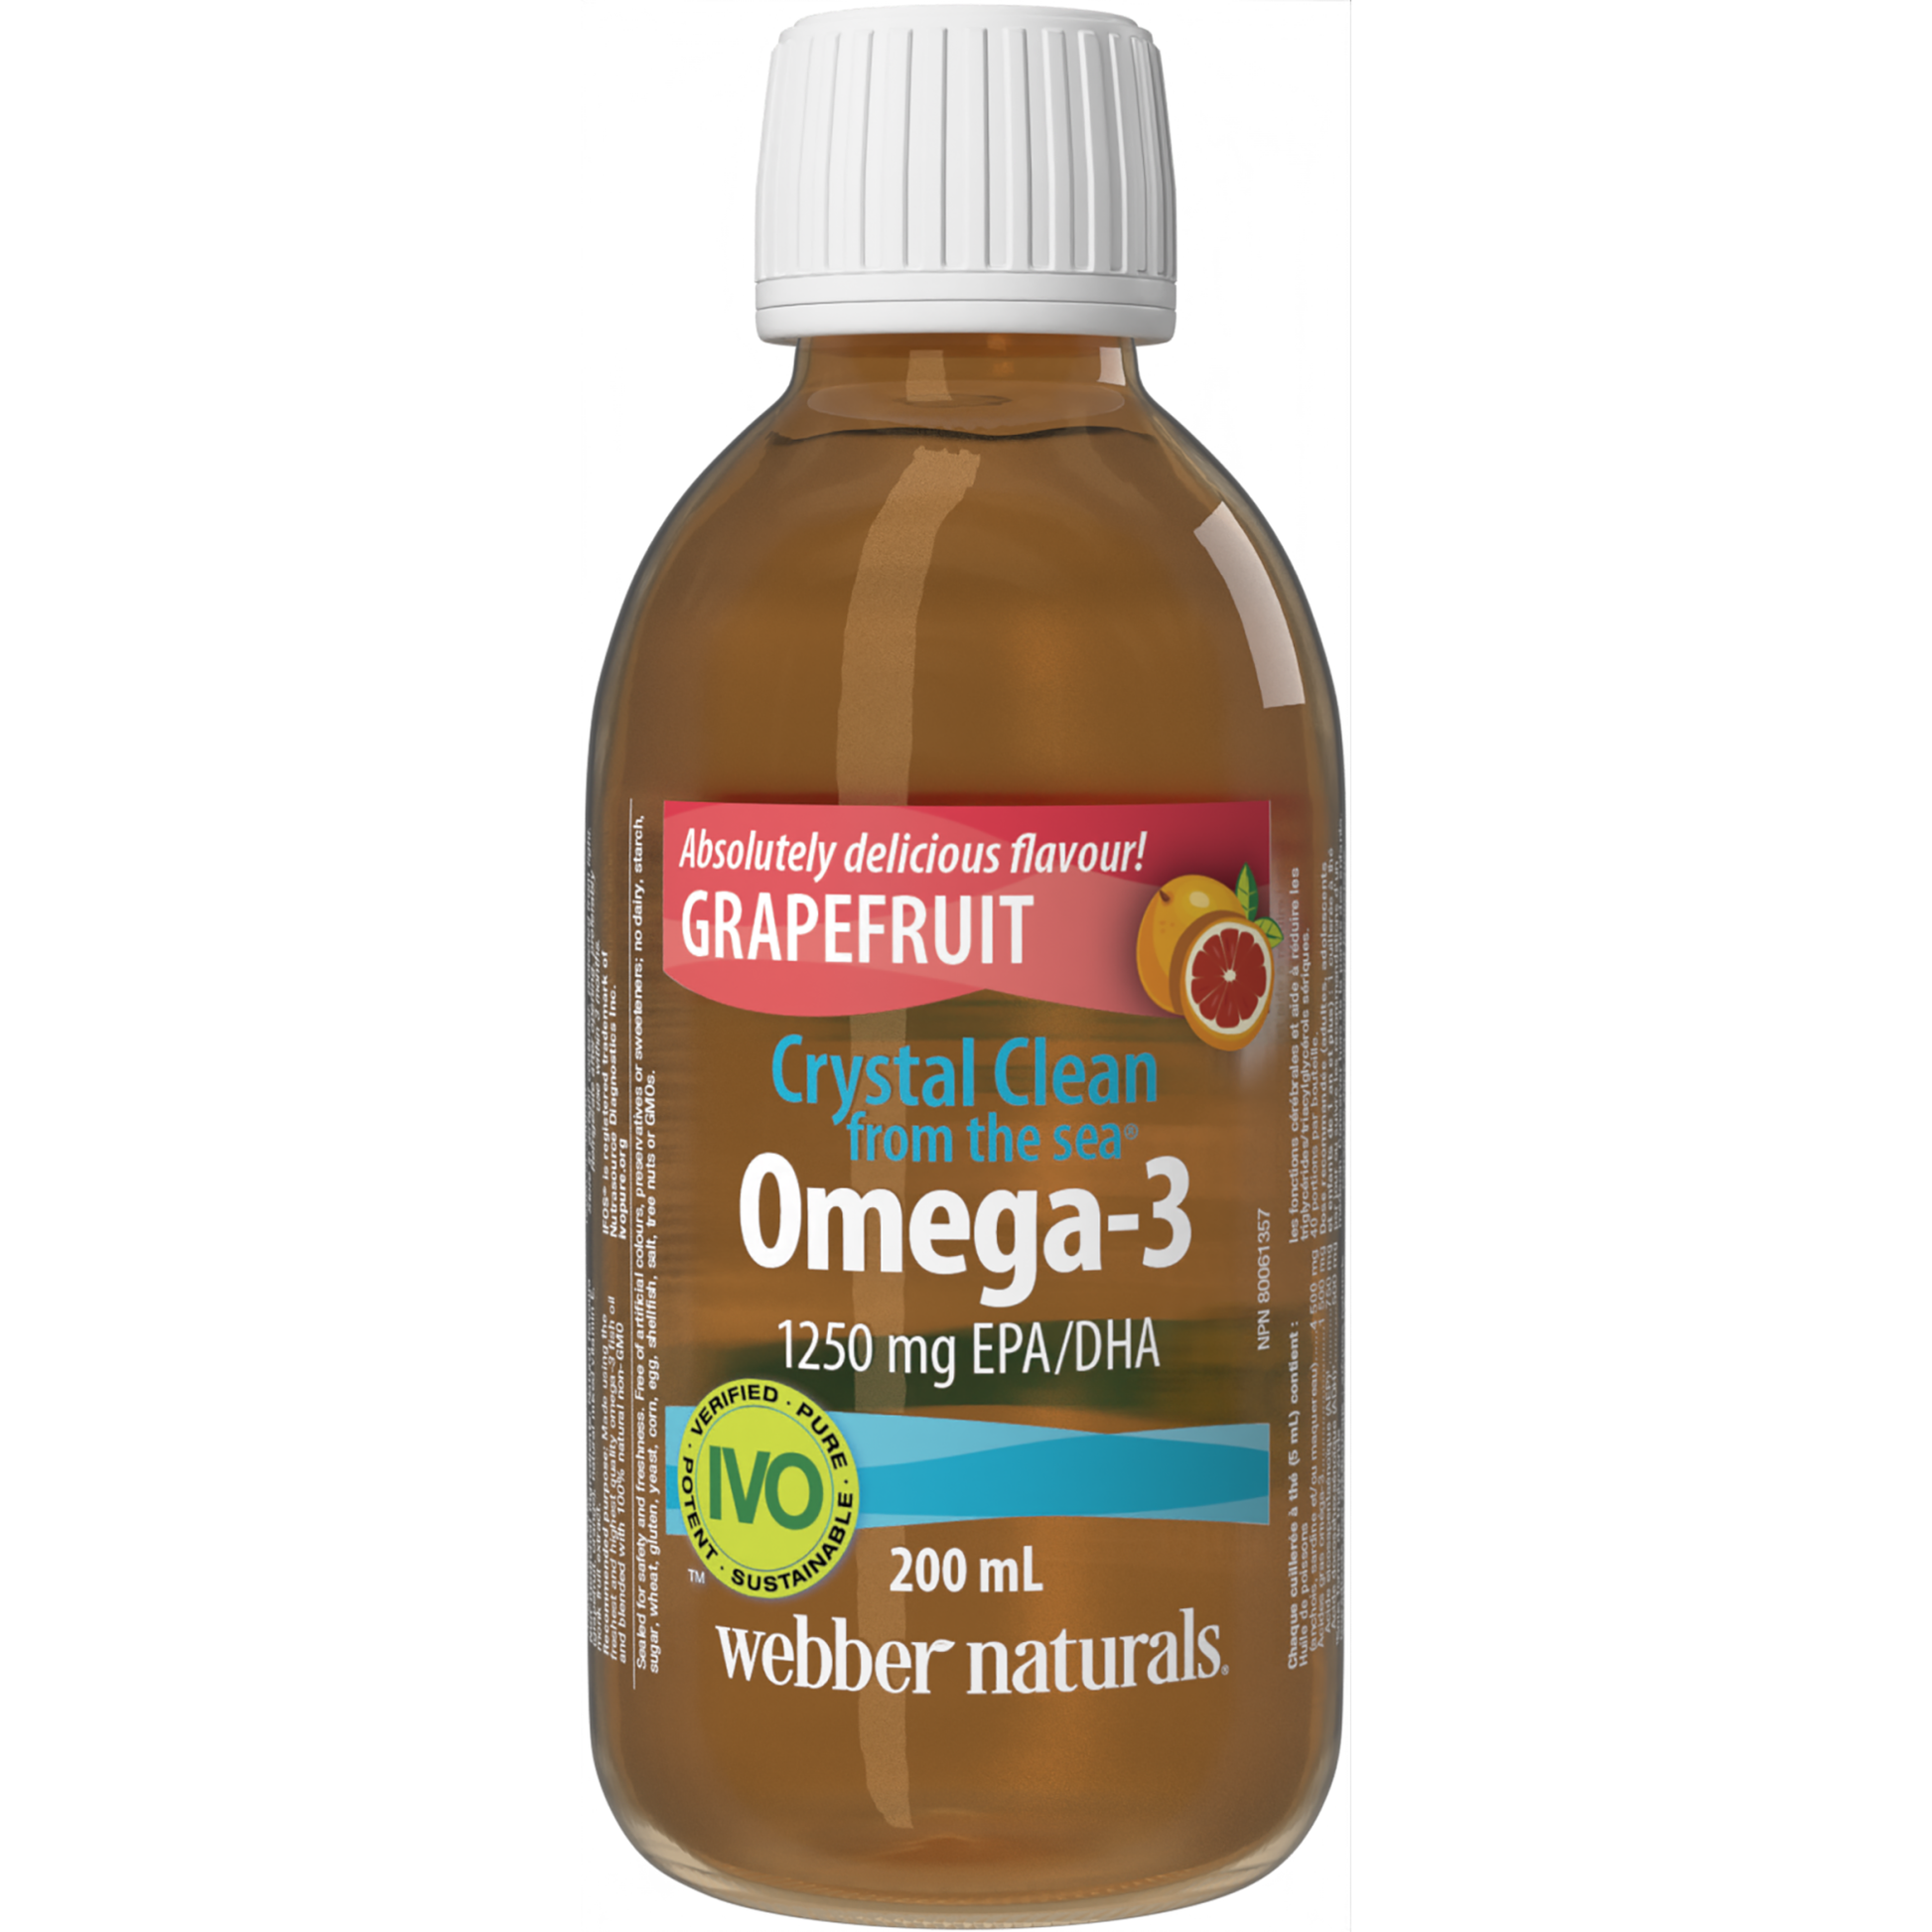 Crystal Clean from the sea® Omega-3 1250 mg EPA/DHA Grapefruit for Webber Naturals|v|hi-res|WN3494